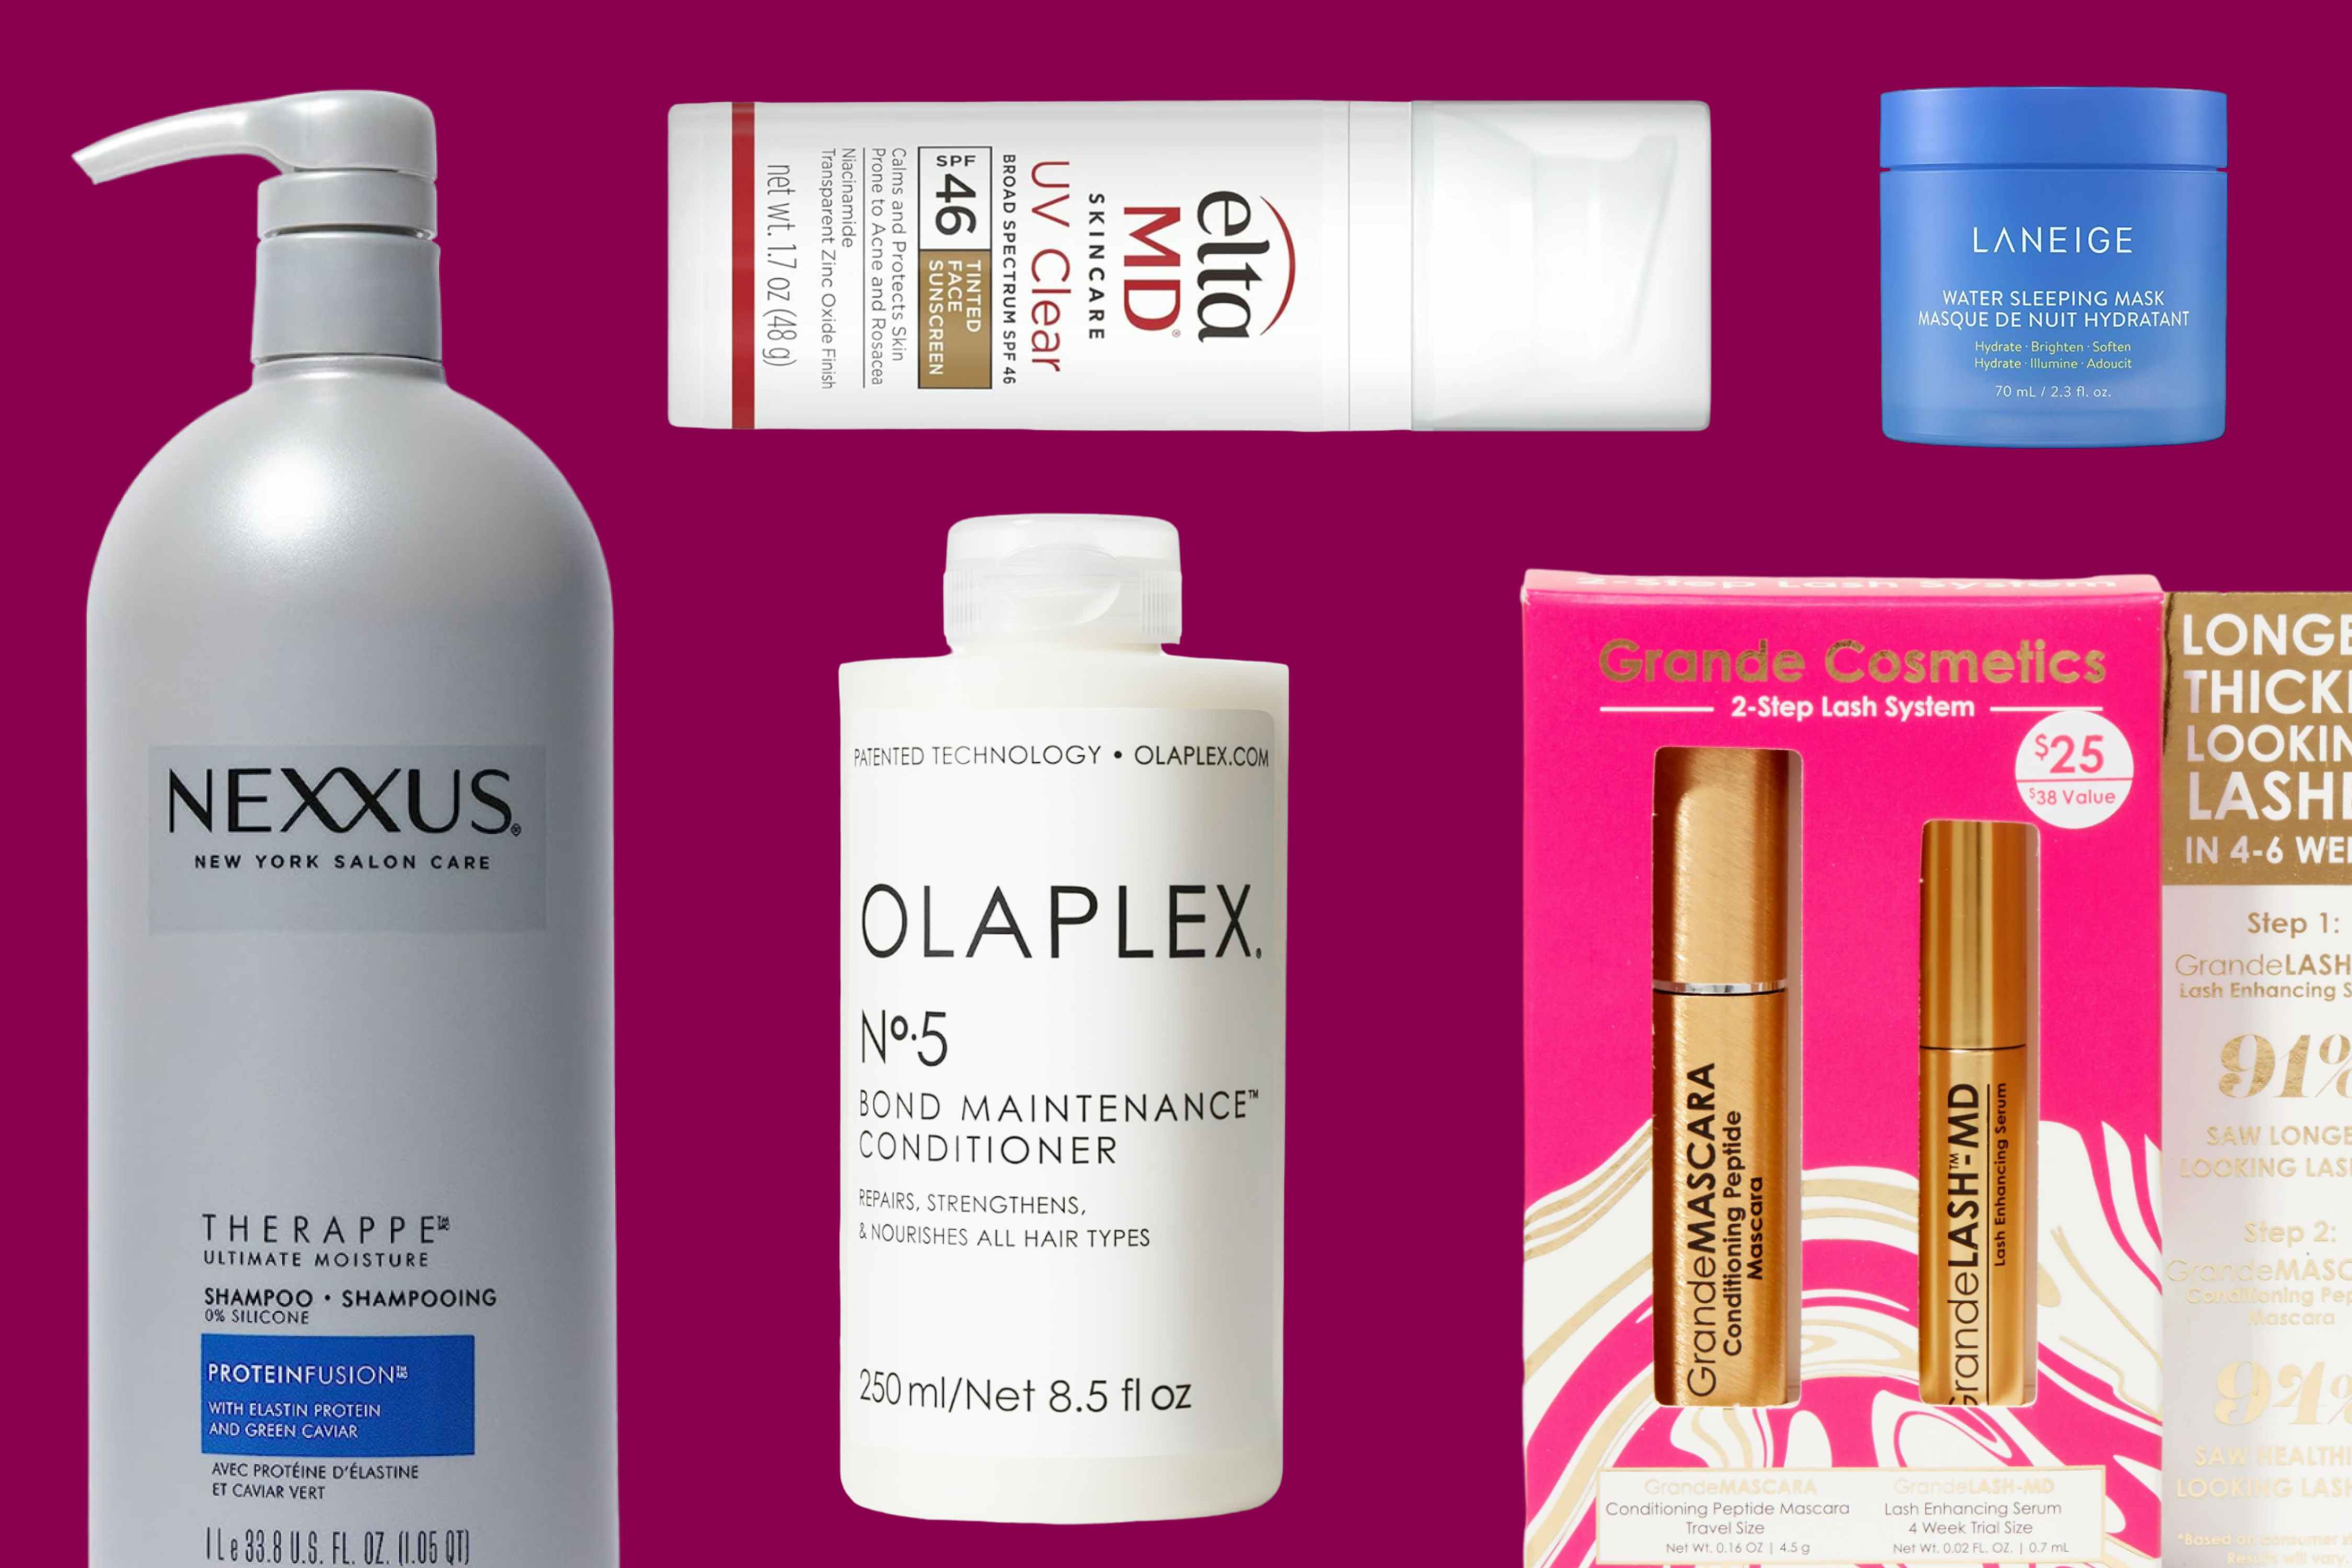 Amazon's Summer Beauty Haul Sale Is LIVE! Get a $10 Credit Now